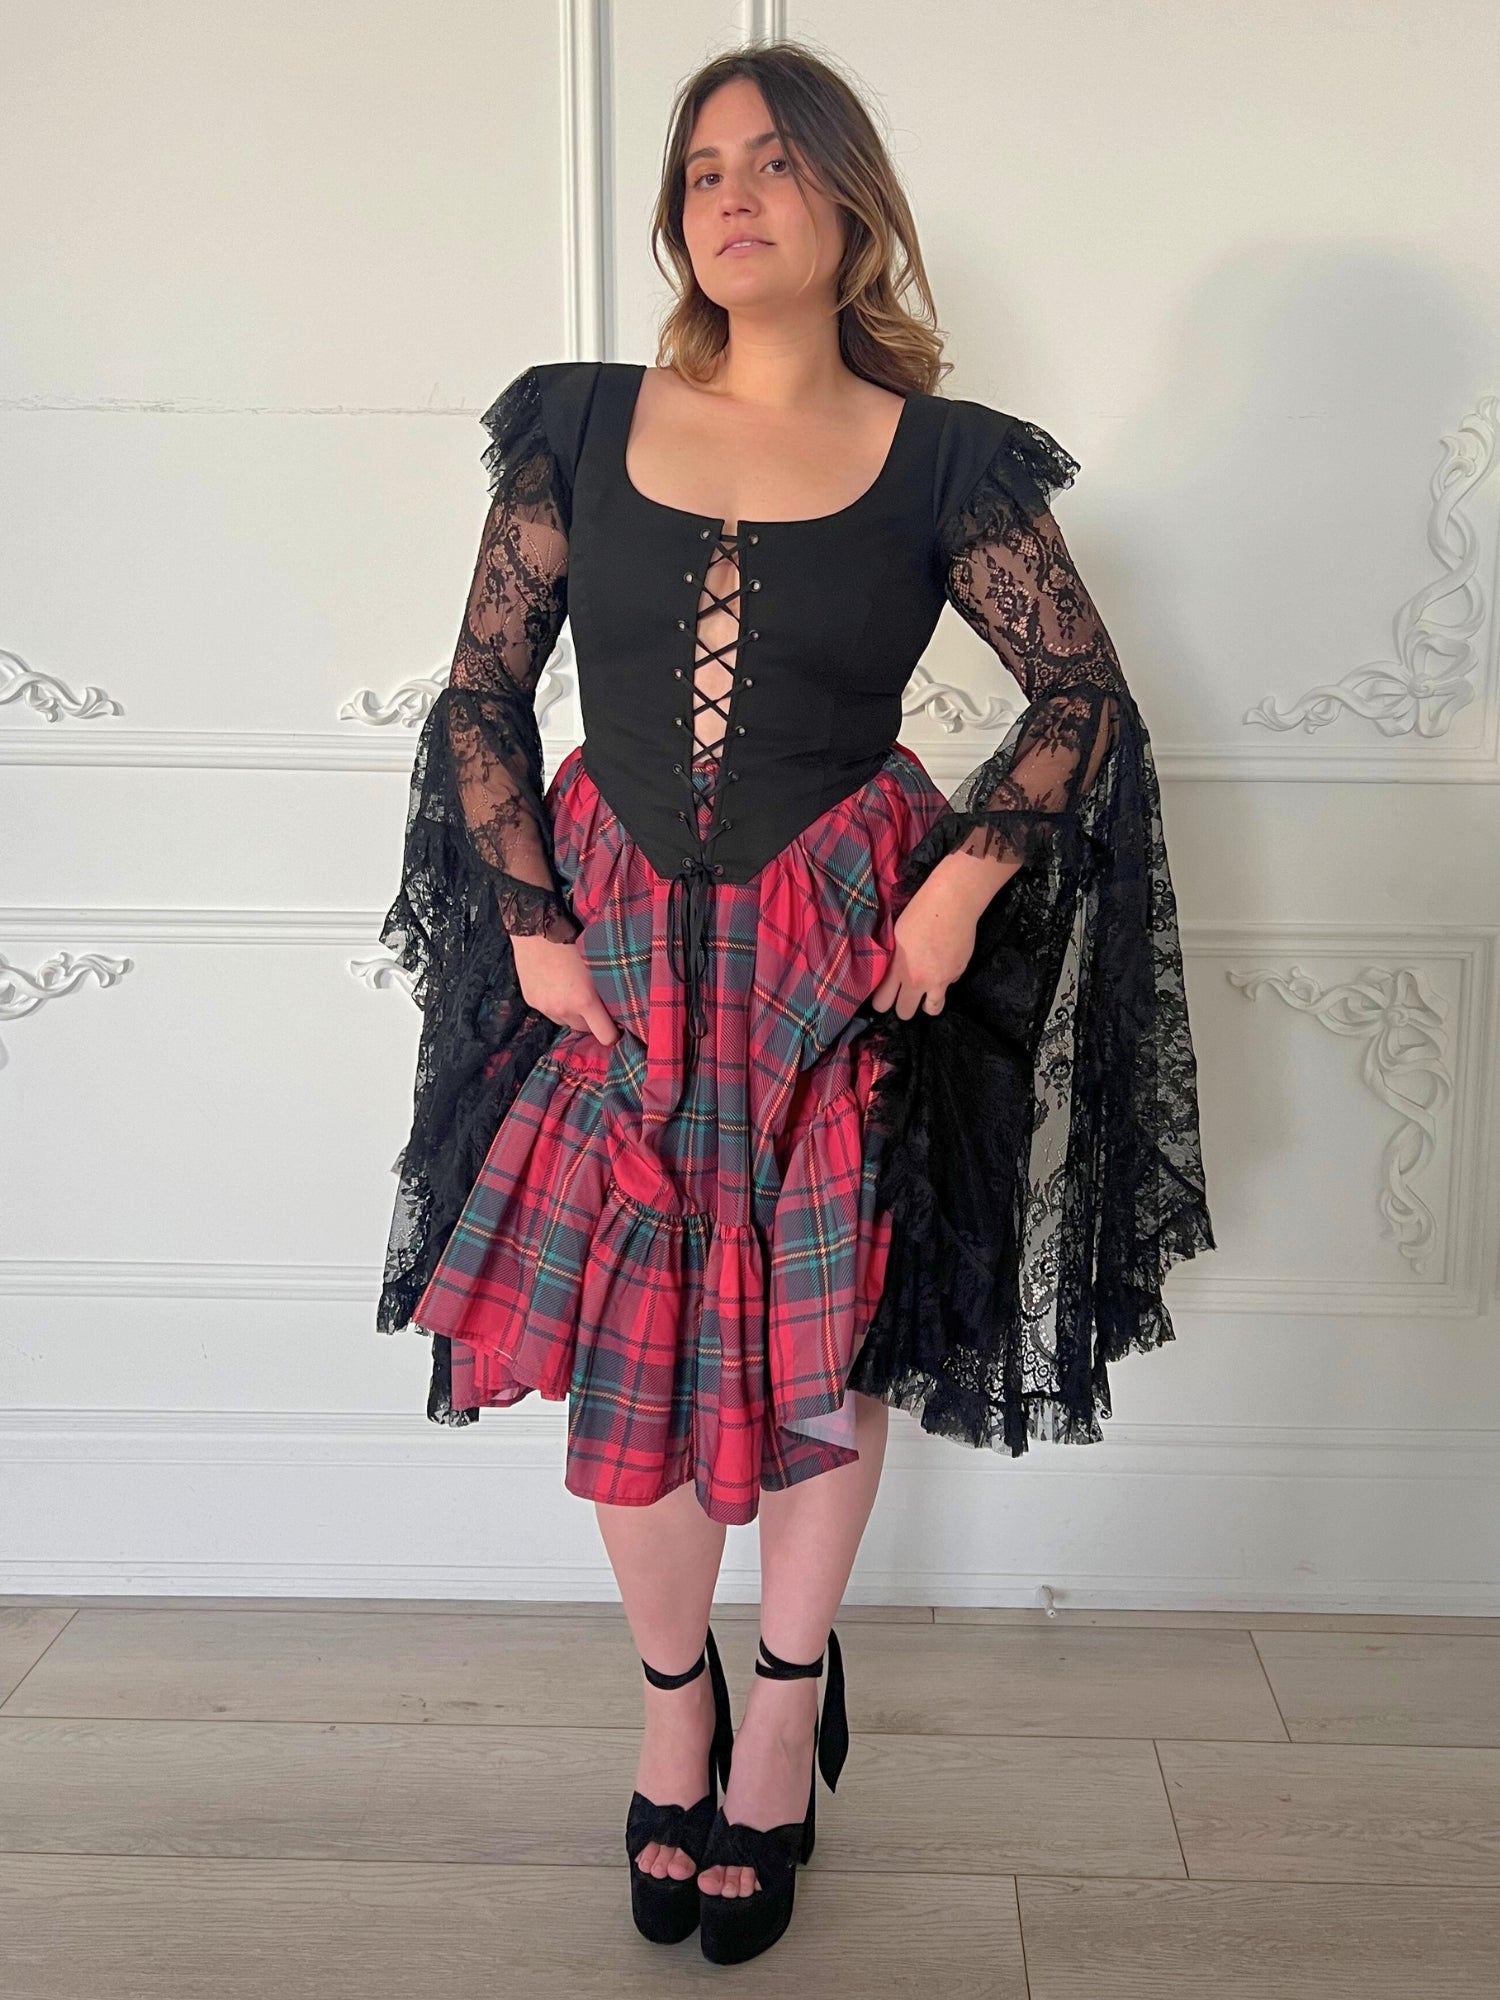 The Guinevere's Revenge Corset Top - Guinevere's revenge made in the rich black hue exudes timeless allure, while the corset's structured design ensures a flattering fit, cinching at the waist to accentuate your curves. The luxurious theatrical lace sleev